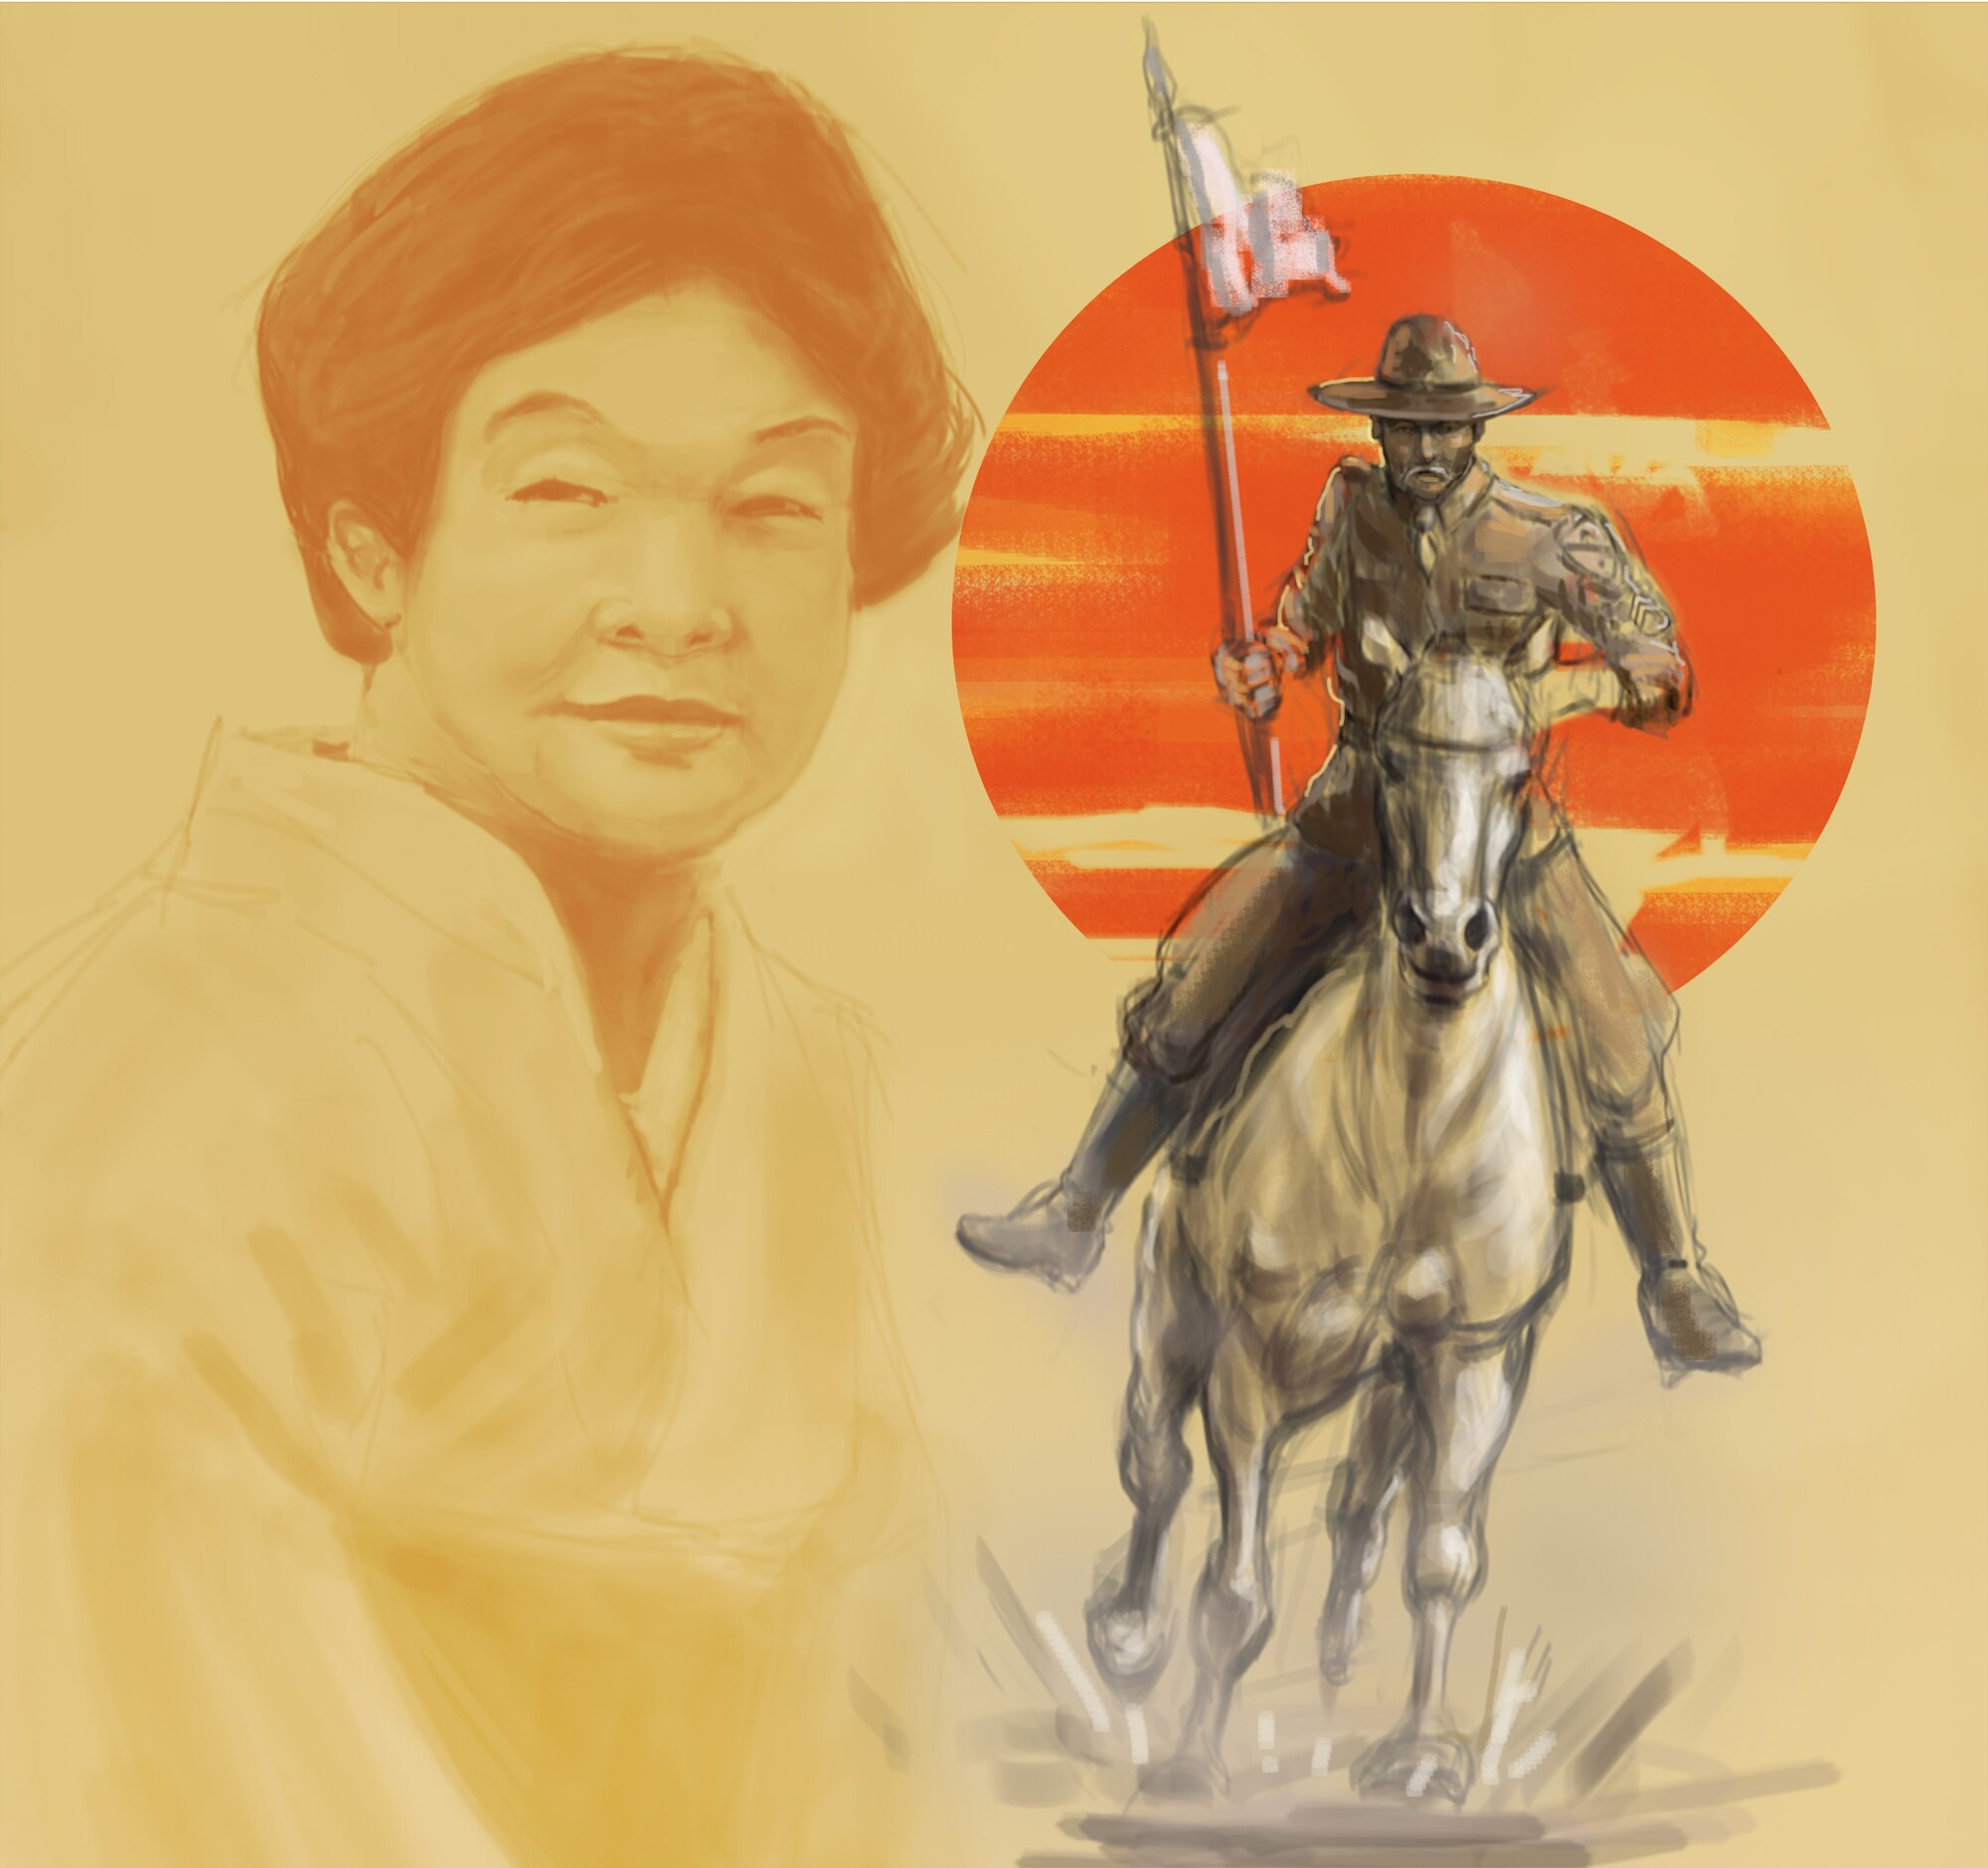 This artwork was created in freehand sketch using Wacom tablet and Adobe Photoshop. The layout composition was designed to tell the story of a World War II veteran, Sergeant Allen McDonald, a cavalryman assigned to the U.S. Army 1st Cavalry in Camp Drake, Japan, where he met his Japanese wife. The theme behind the artwork was to show the clash between cultures during post war. This piece was created to support the annual Palo Alto Veterans Hospital Art Exposition, Palo Alto, Calif., April 23, 2014. (U.S. Air Force art by Master Sgt. Elizabeth Concepcion)